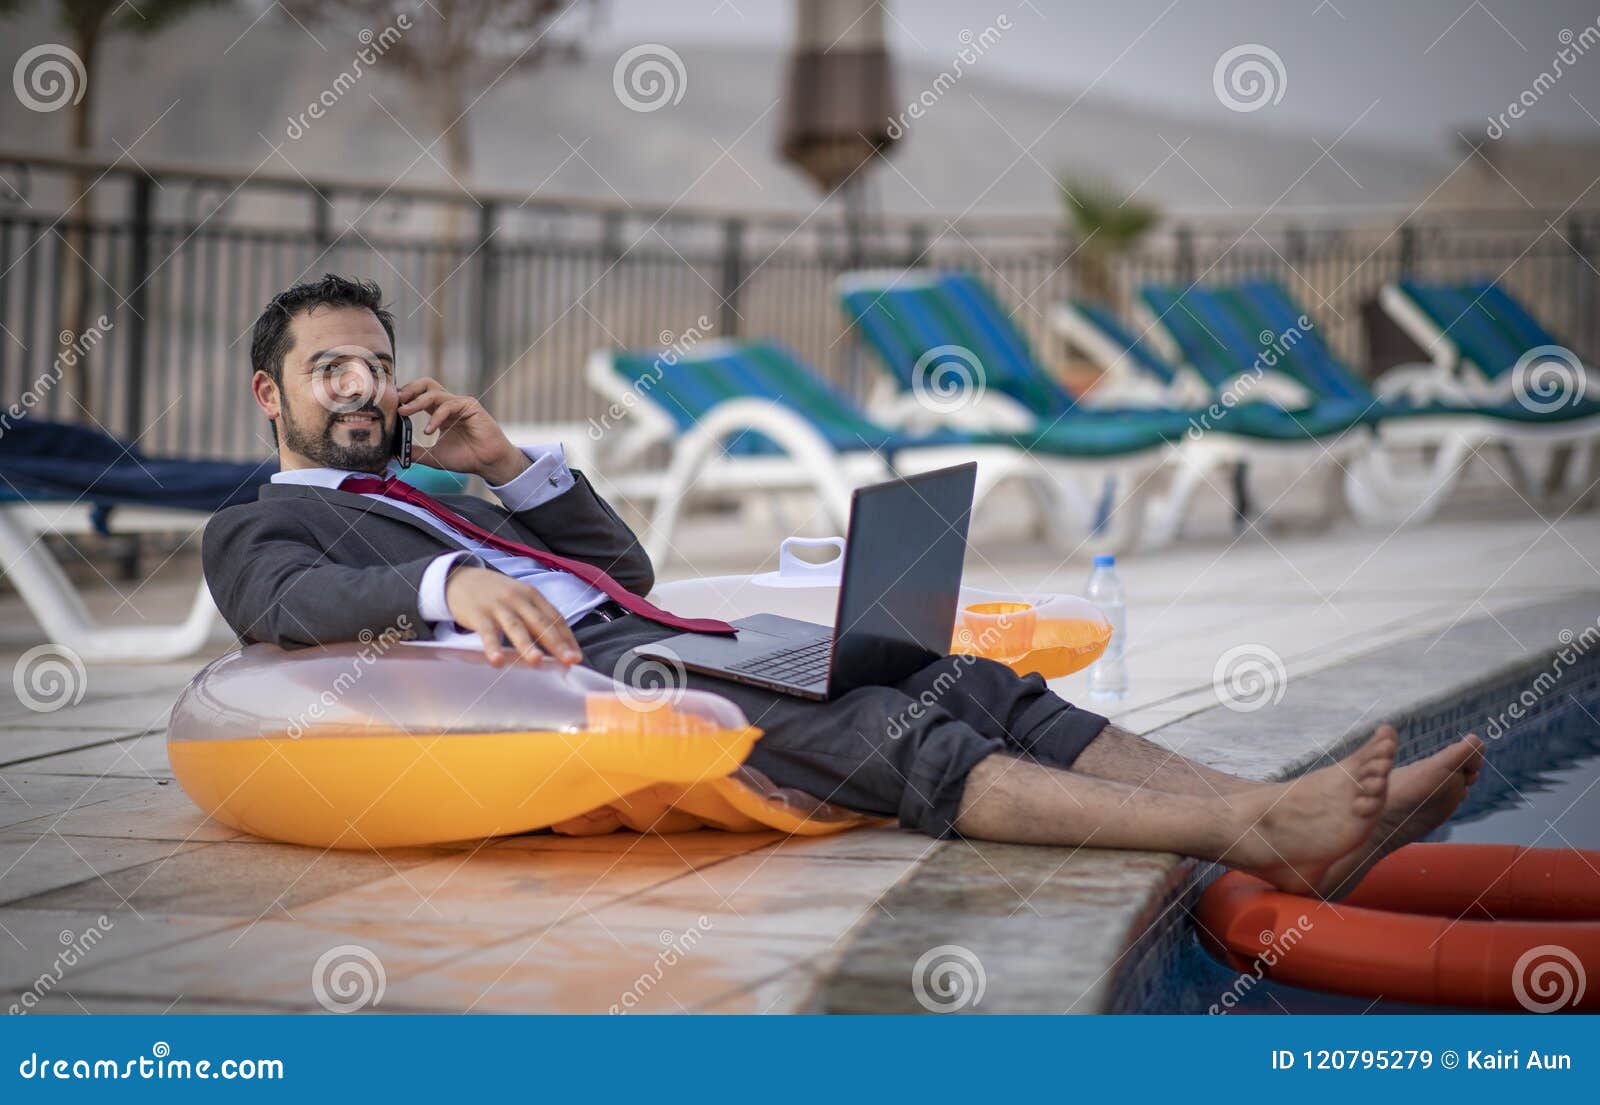 Middle Aged Arab Man by a Pool in His Business Suit Stock Image - Image ...